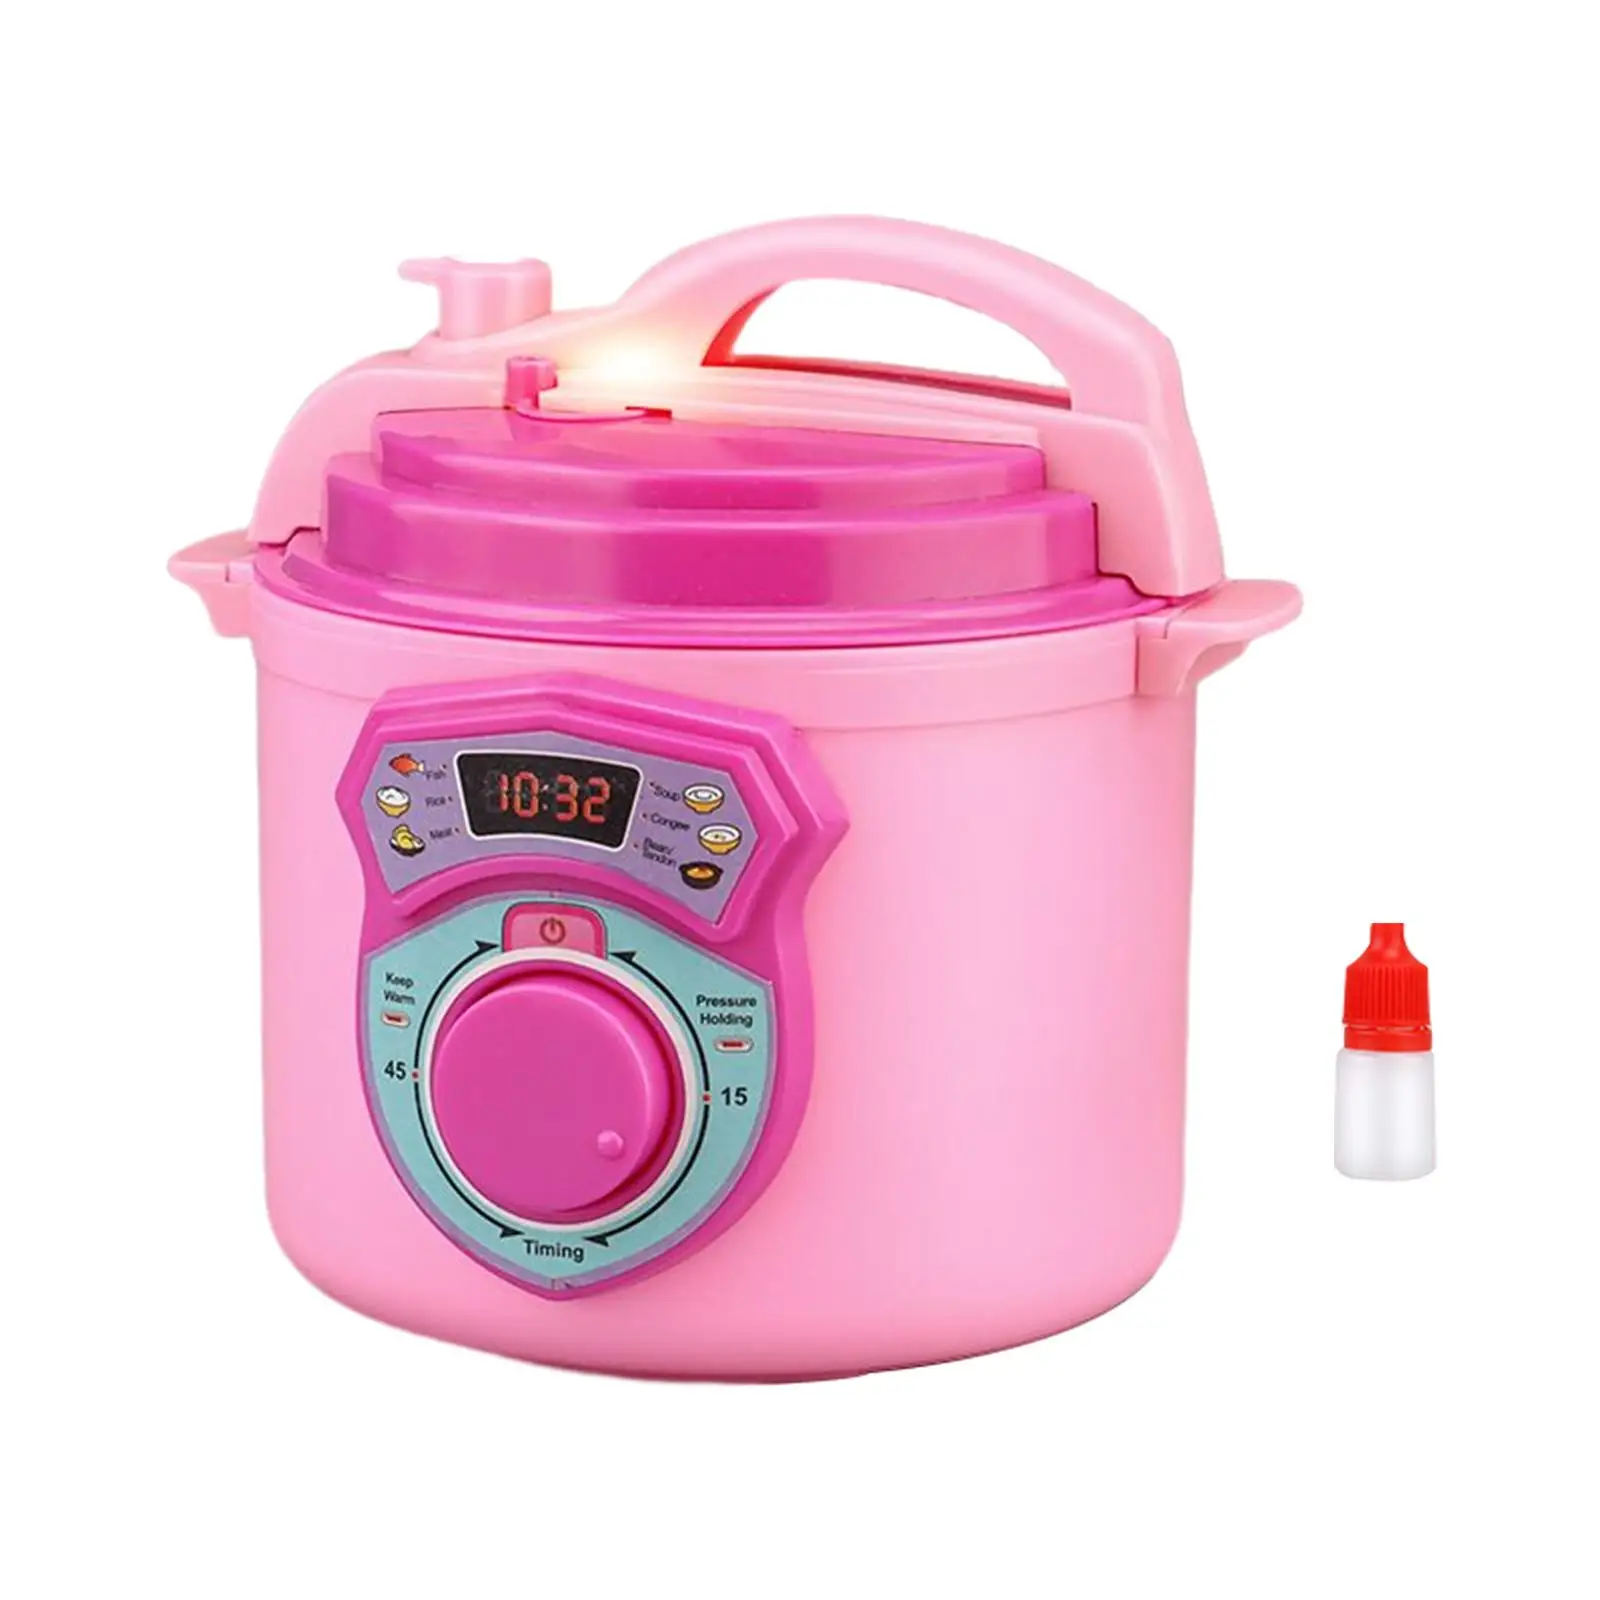 Electric Rice Cooker Toy Kitchenware Interactive Toy for Toddlers Girls Boy